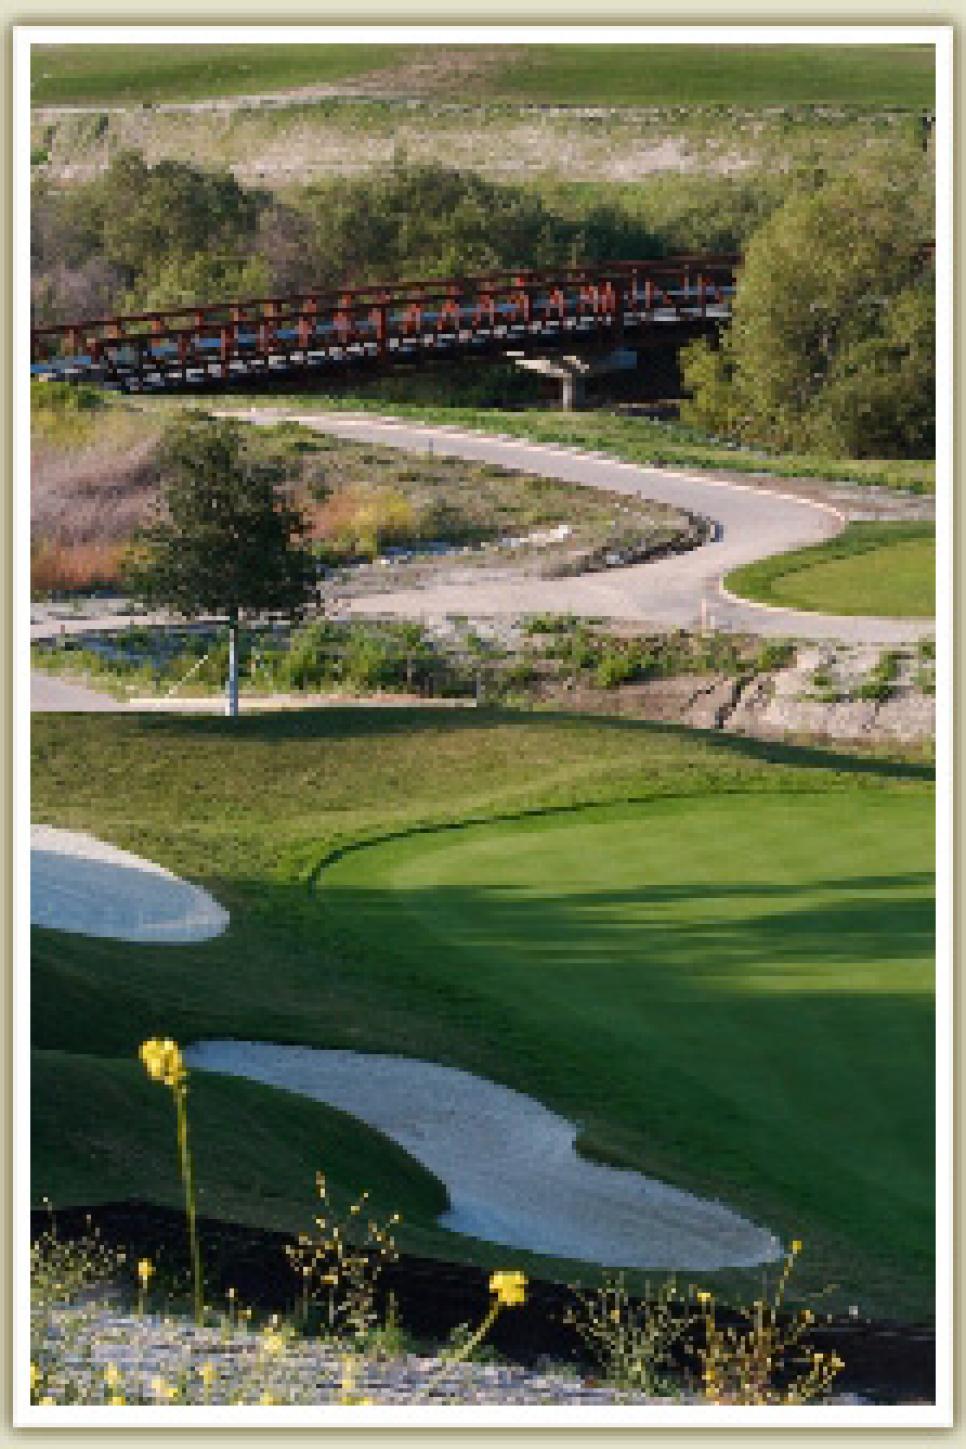 golf-courses-blogs-golf-real-estate-Crossings-Newsletter-photo-thumb-229x334.jpg